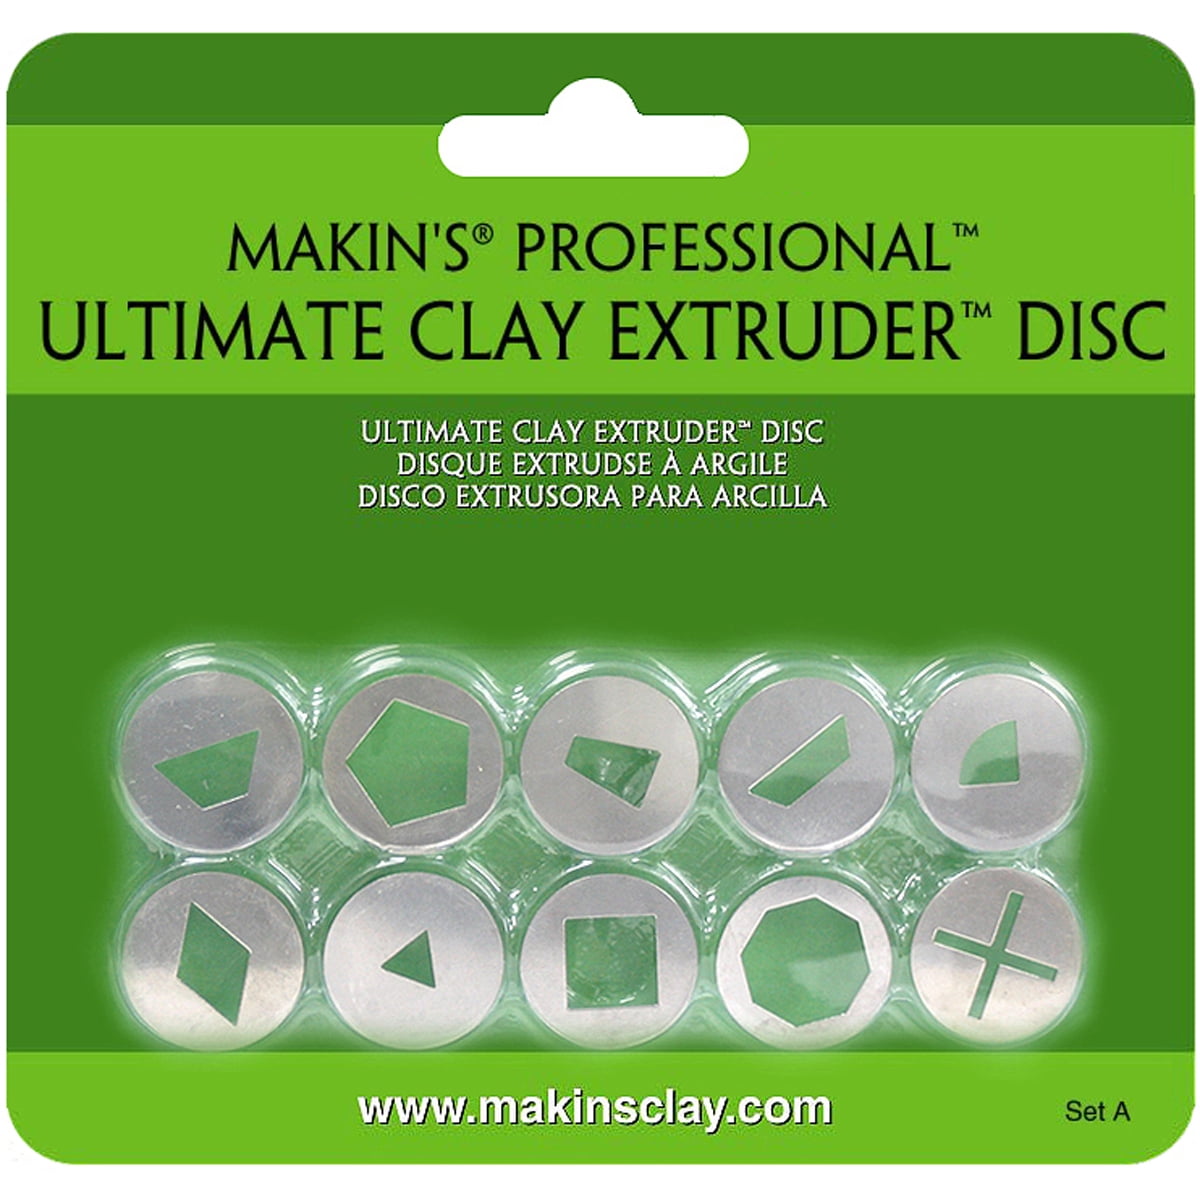 10 Per Package Stainless Steel Makins USA 35100 Professional Ultimate Clay Extruder Discs 